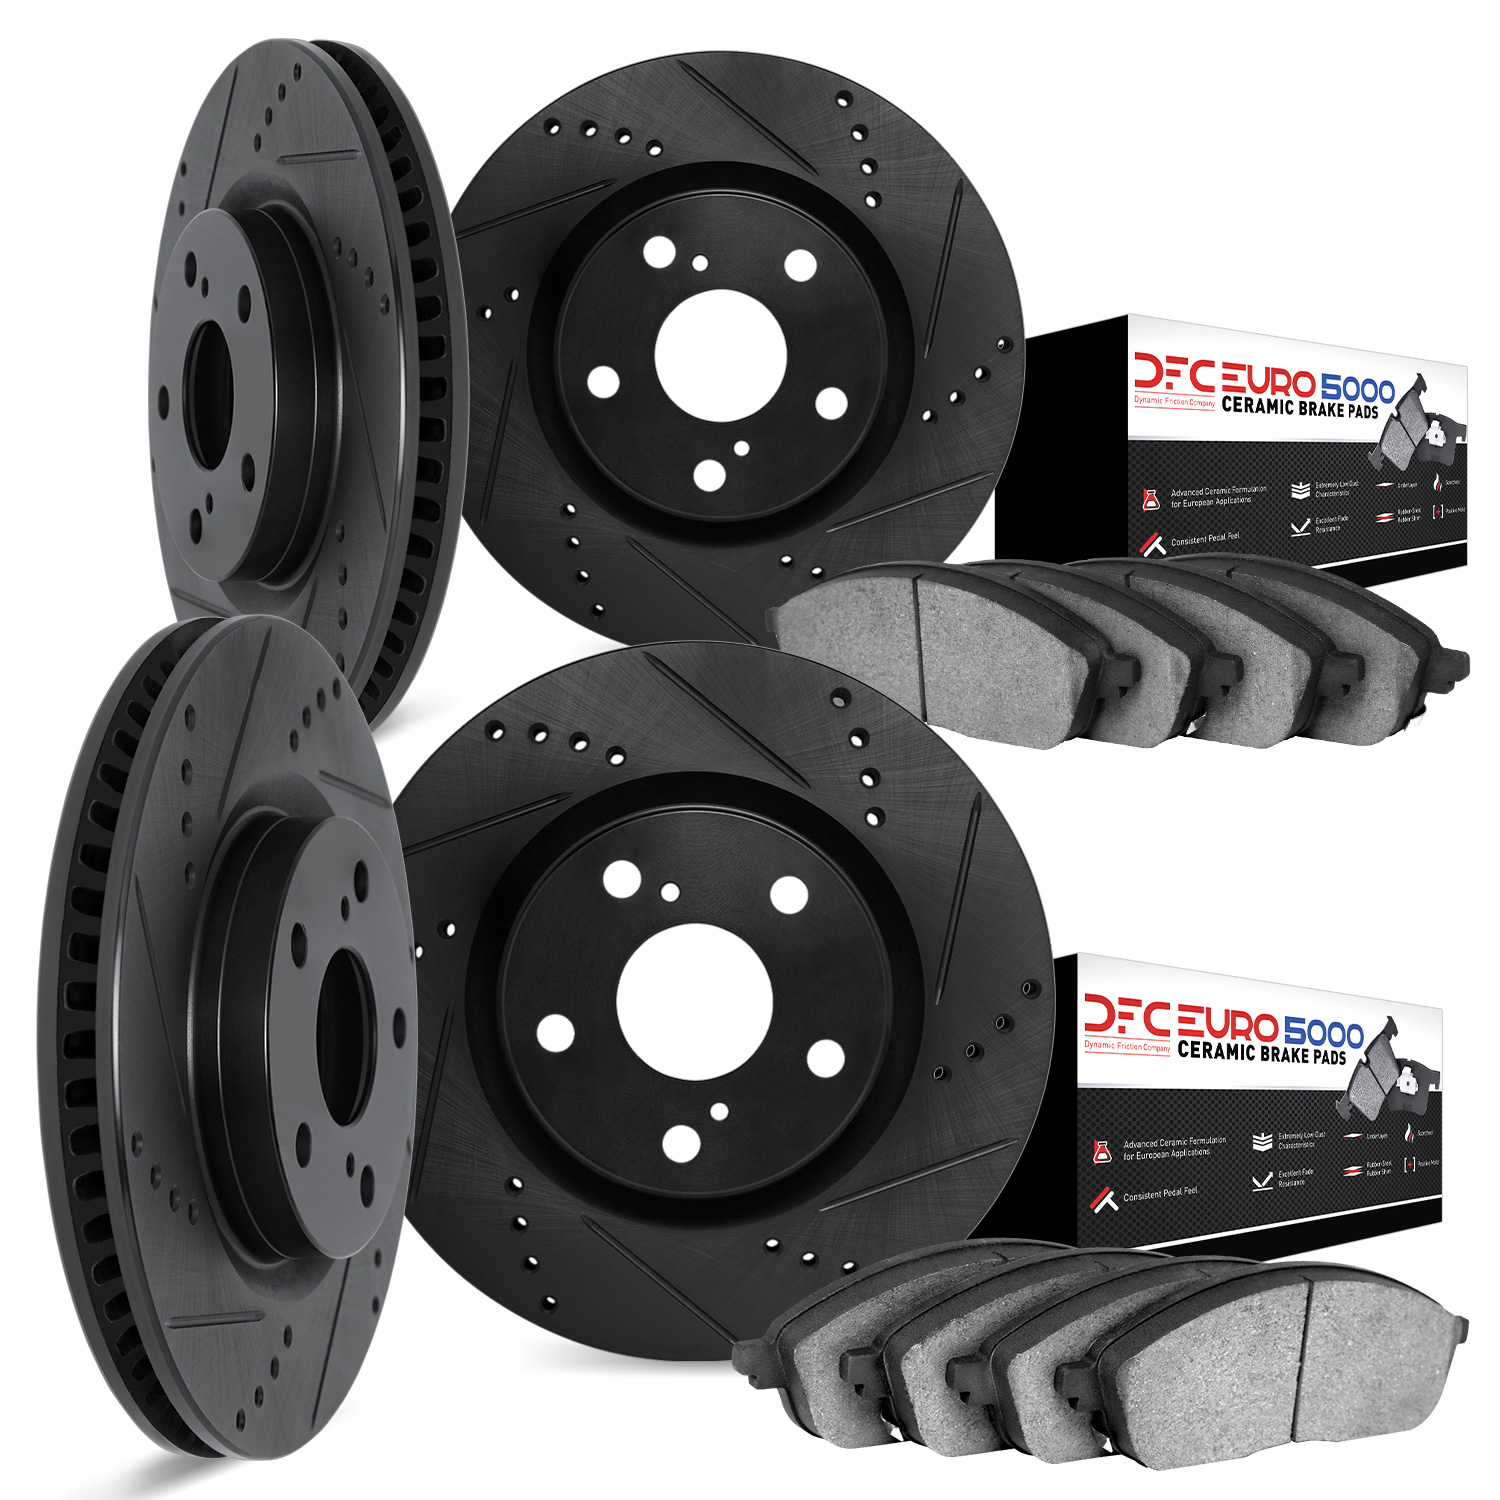 8604-31026 Drilled/Slotted Brake Rotors w/5000 Euro Ceramic Brake Pads Kit [Black], 2009-2017 BMW, Position: Front and Rear